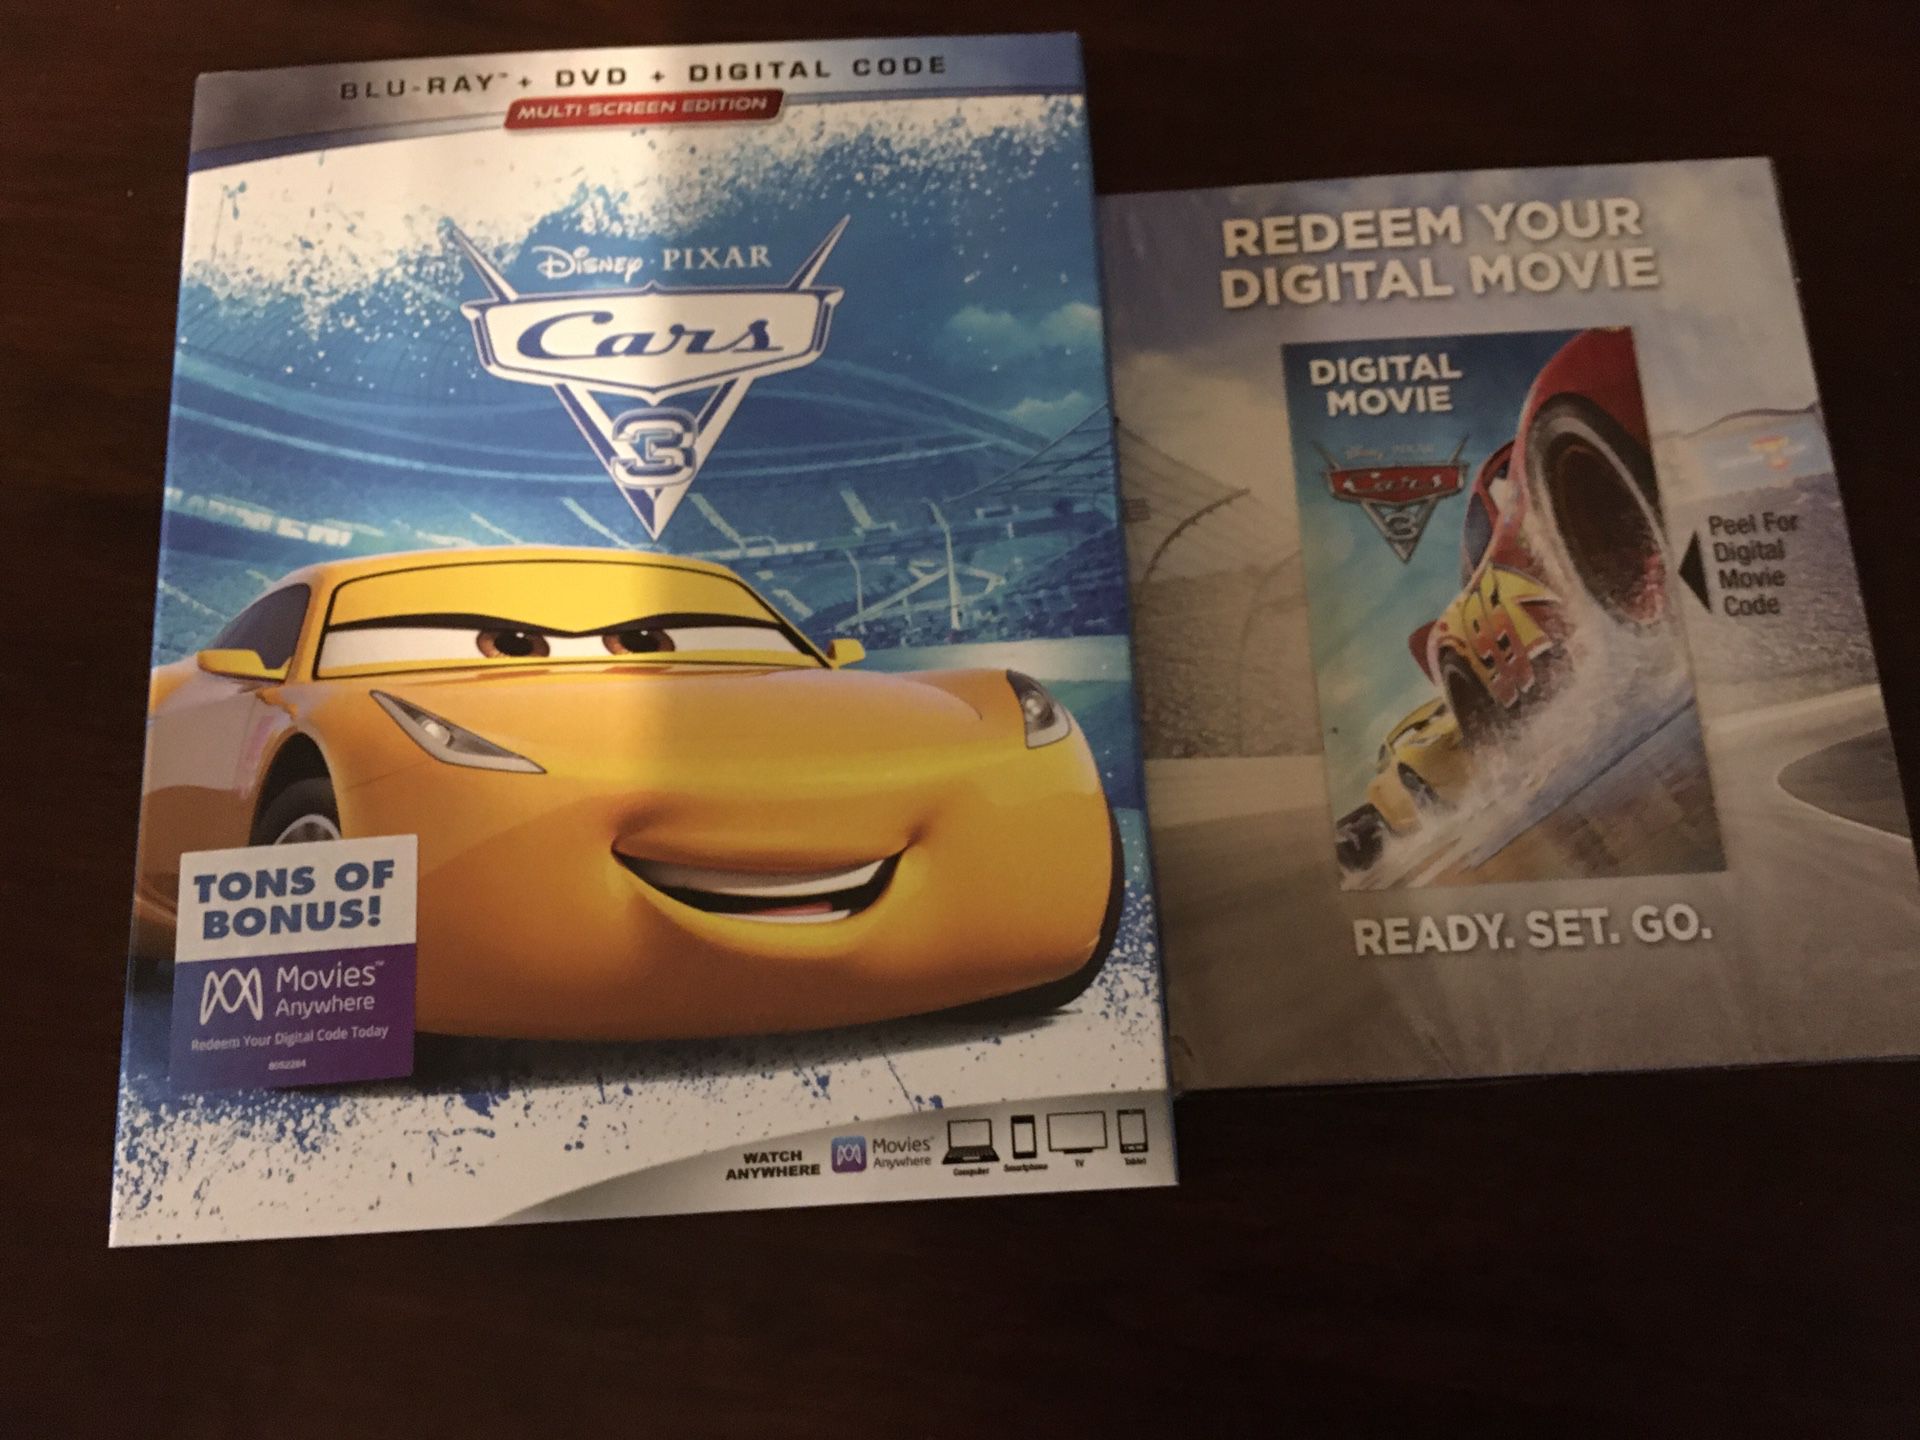 Digital Copy of "Cars 3" I can ONLY accept Zelle or cash...